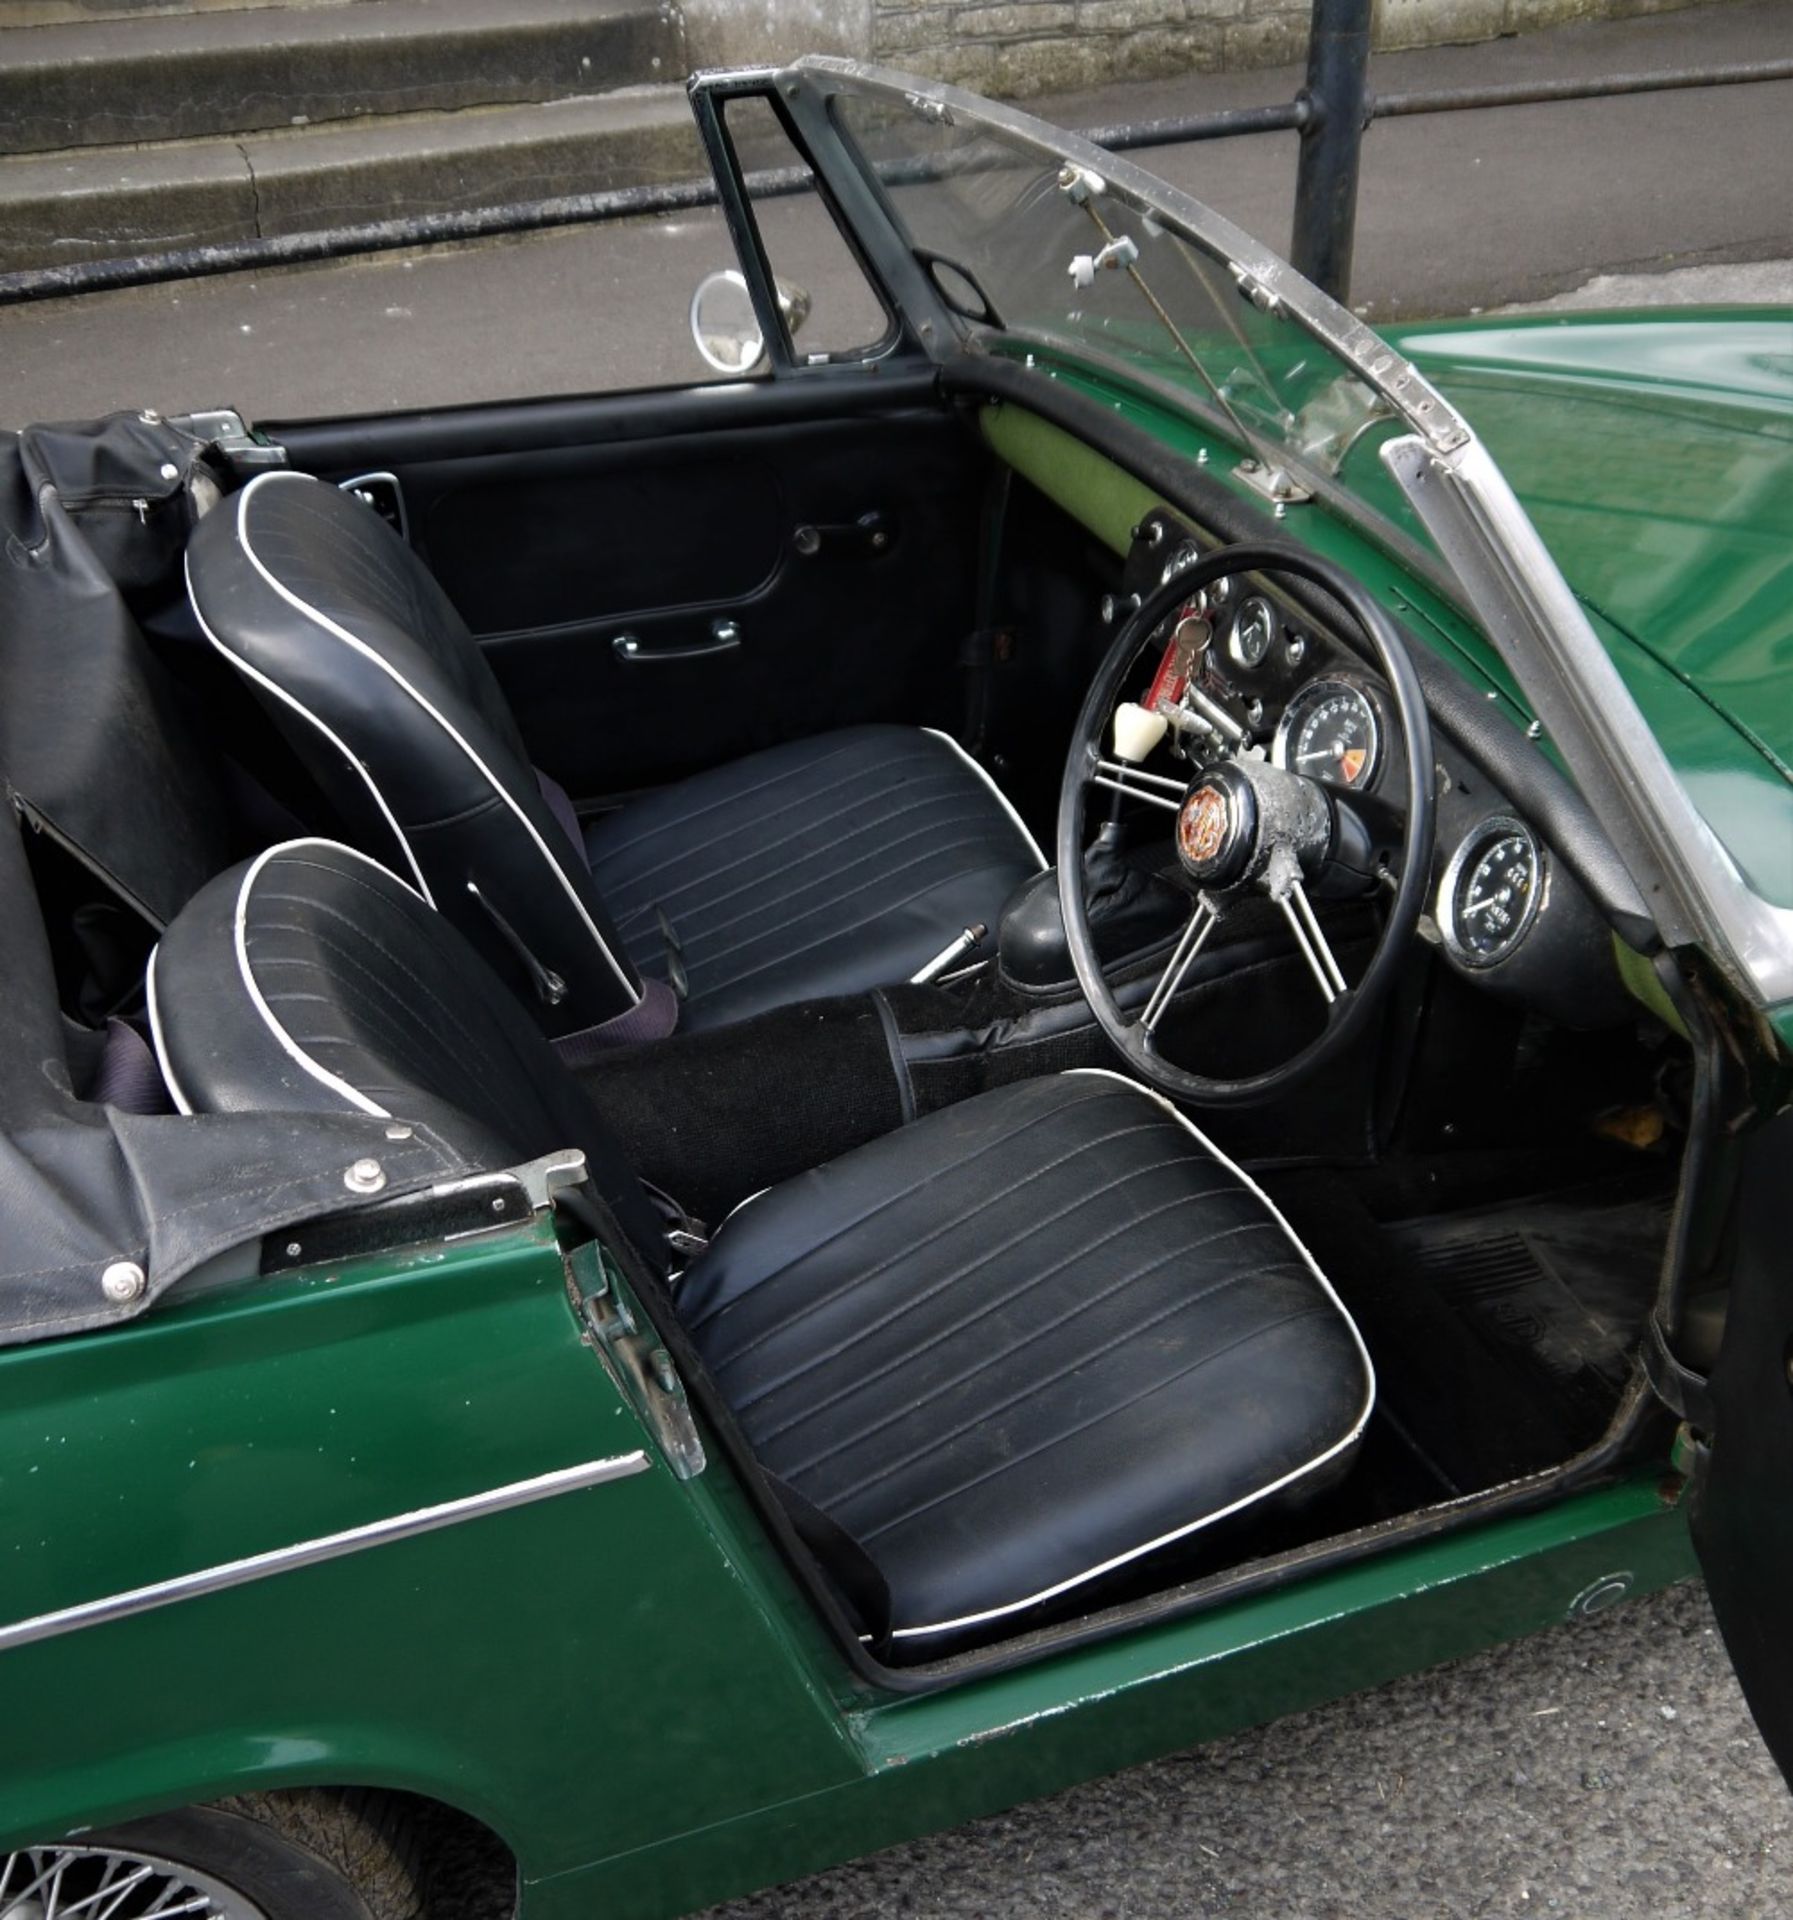 1968 MG MIDGET MARK III Registration Number: VHV 707G Chassis Number: G-AN4/67396-G Recorded - Image 16 of 21